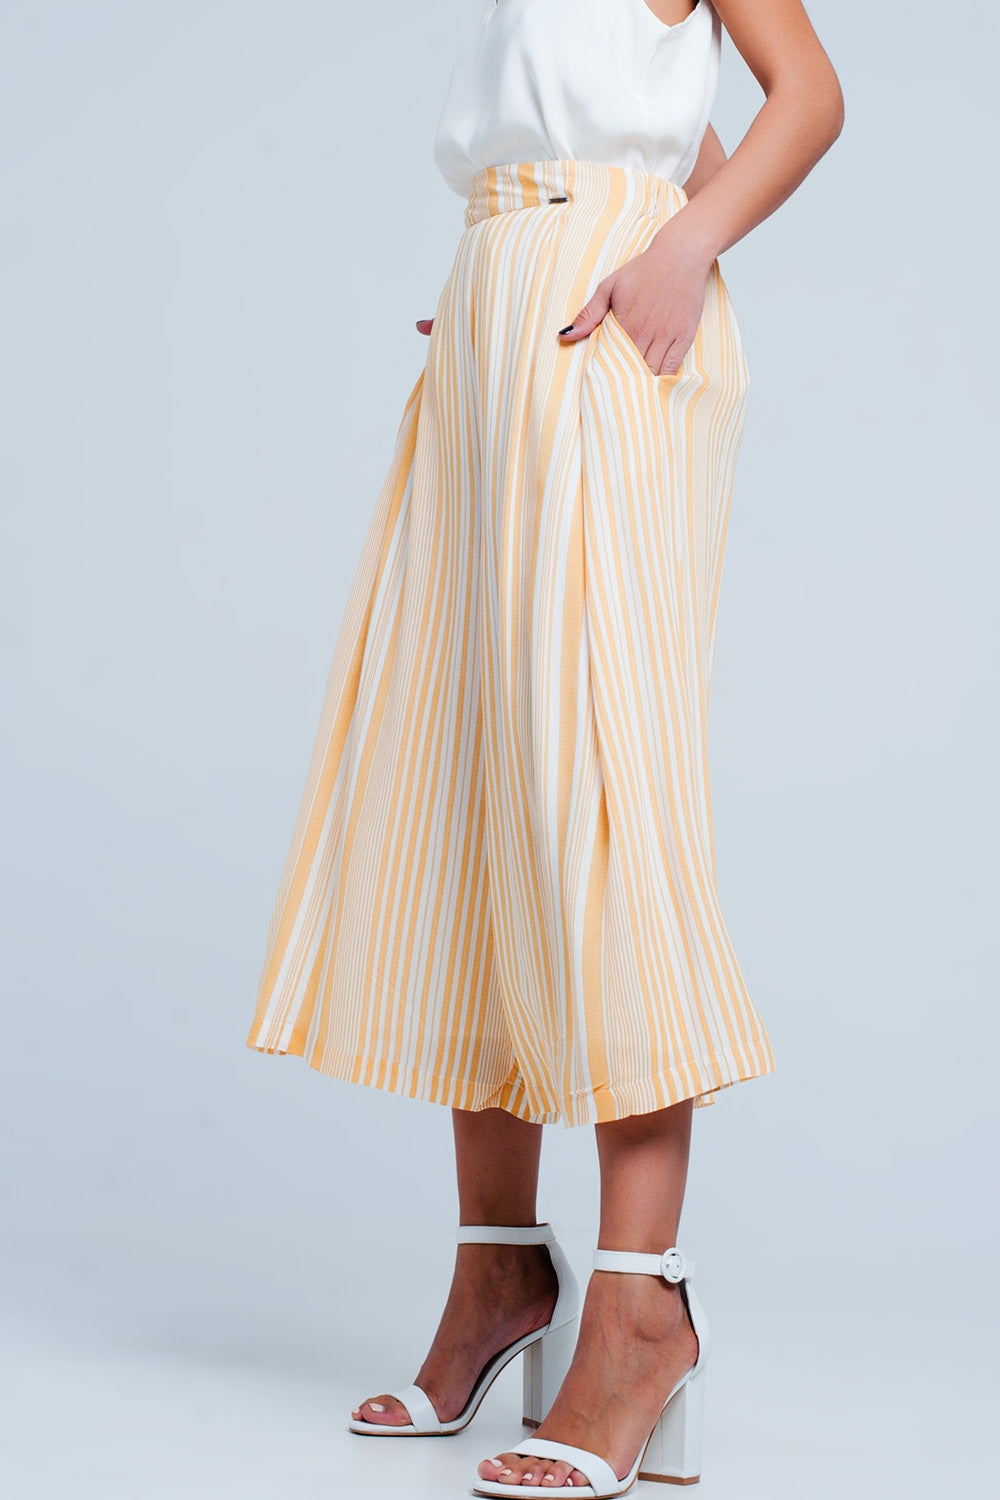 Q2-Culottes in yellow stripe-Pants